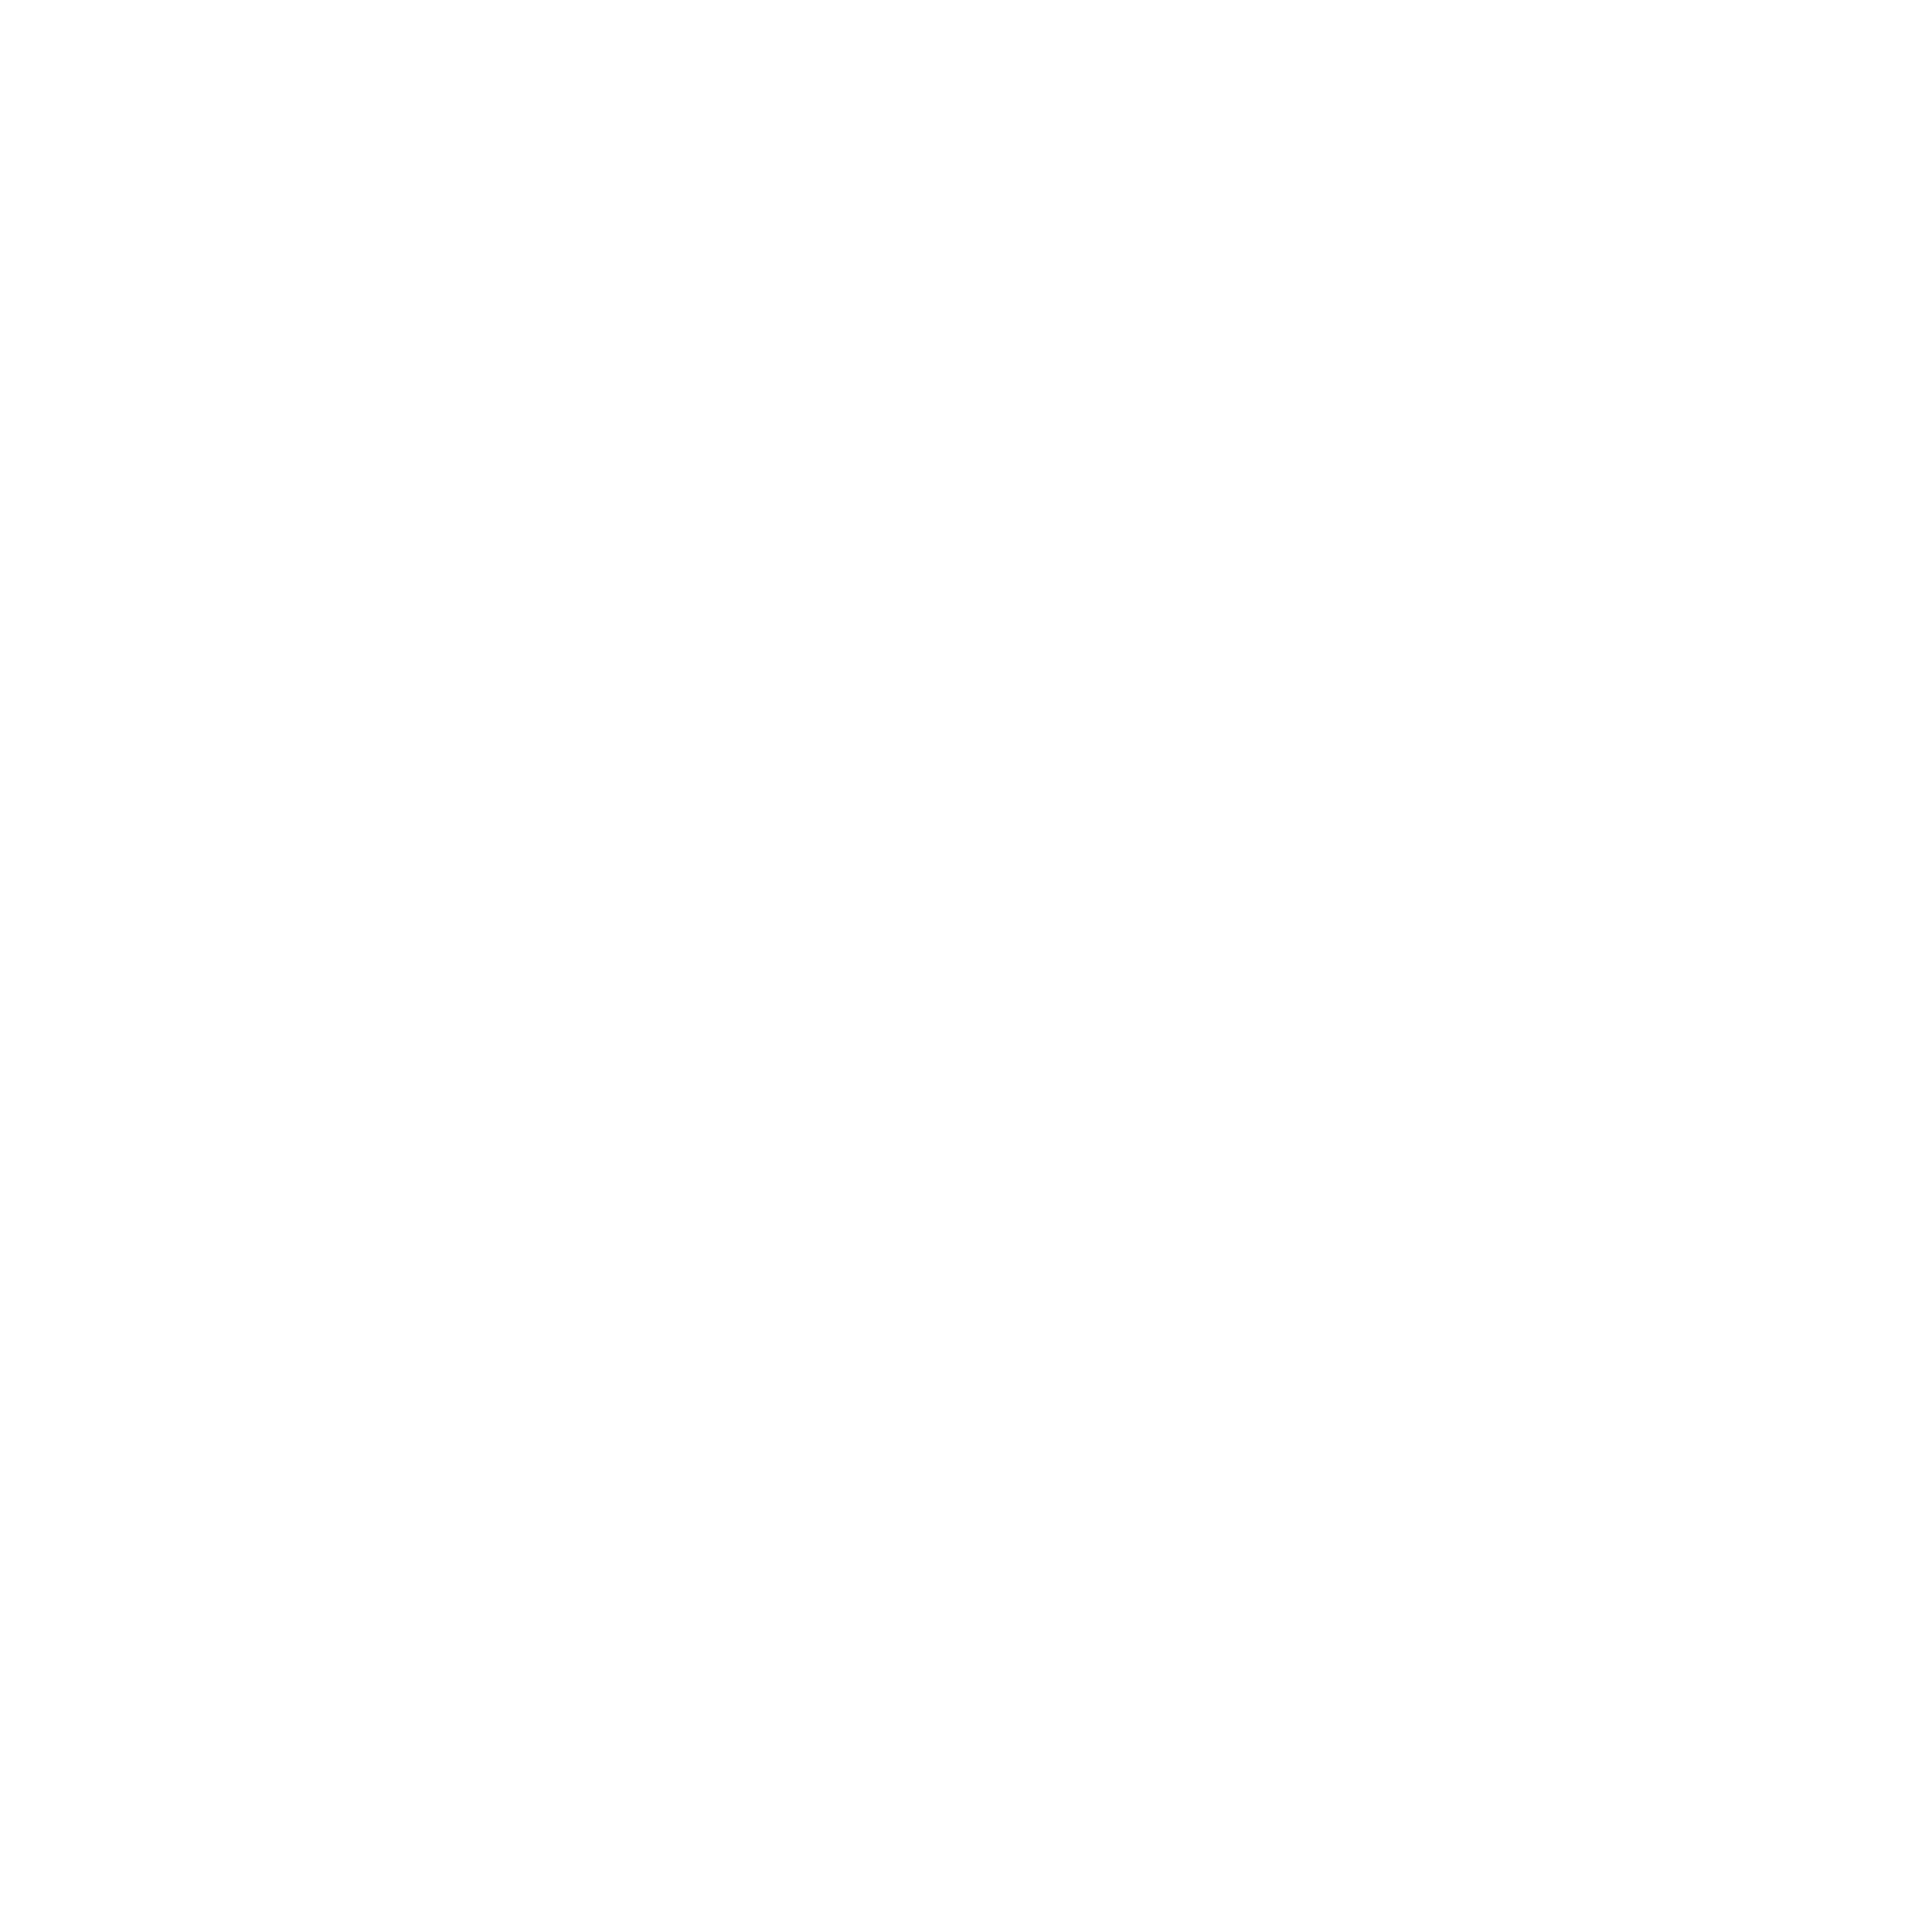 Walk your value